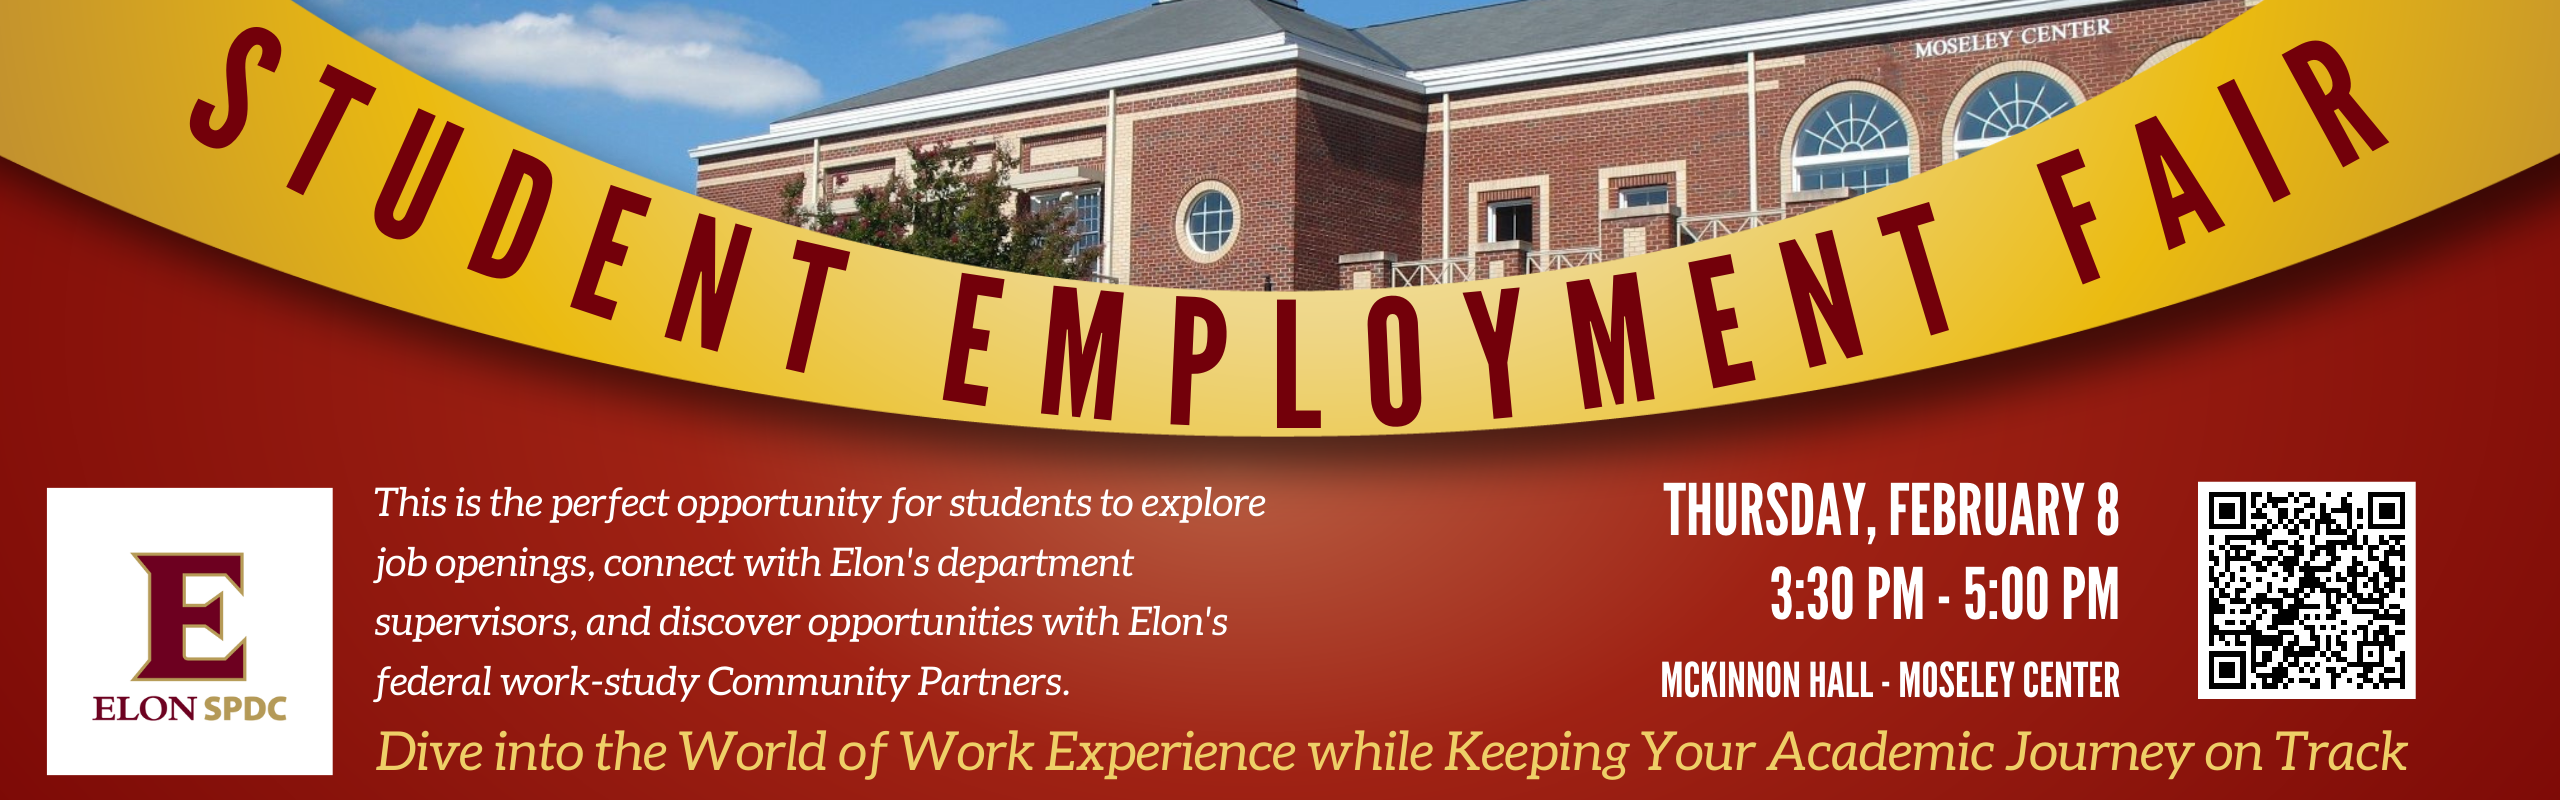 Student Employment Fair Feb 8 at 3:30 pm in Mckinnon Hall - Moseley Center Details found on the Elon Job Network